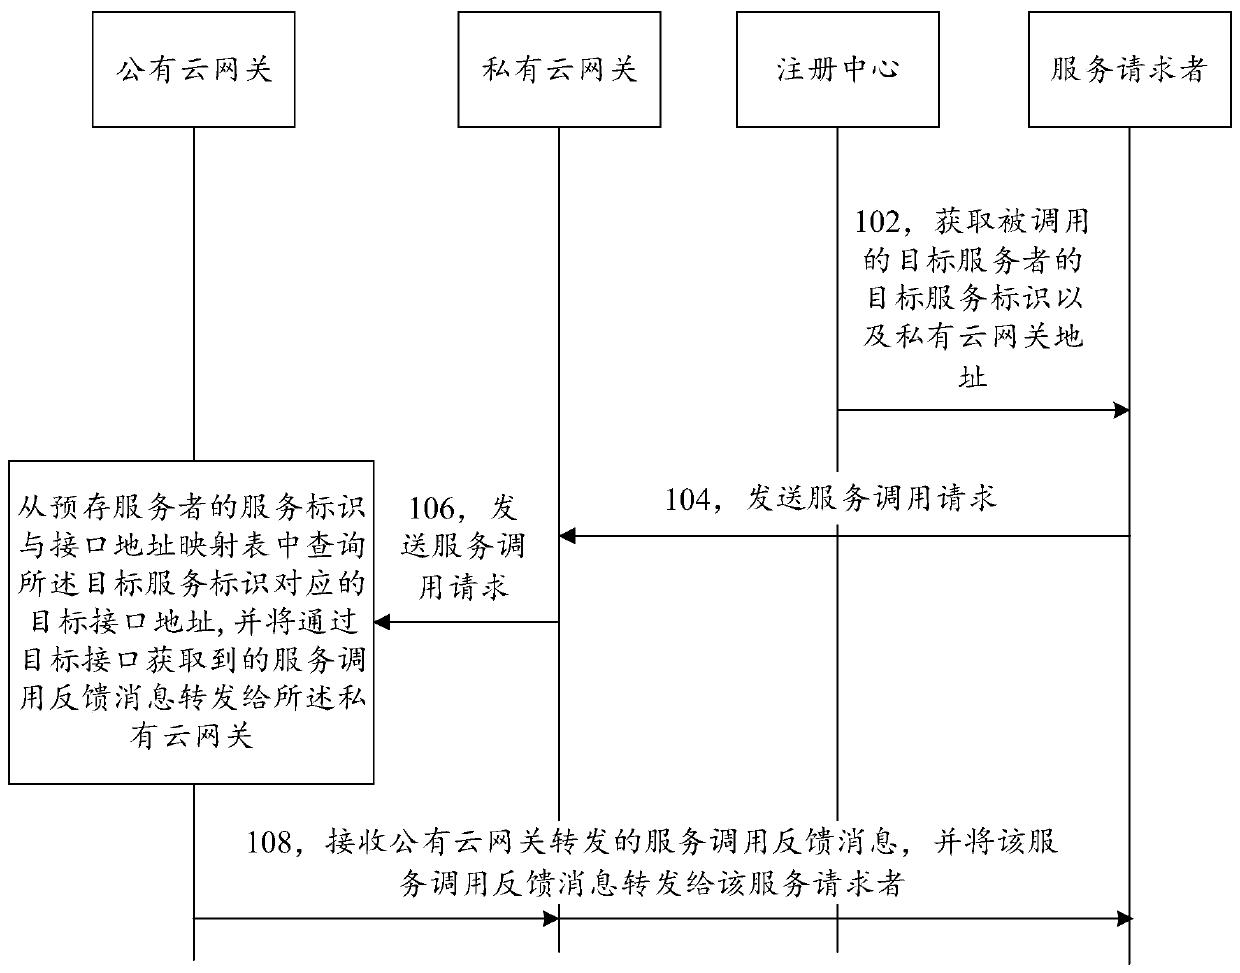 Cross-cloud service calling processing method, gateway server and requester server